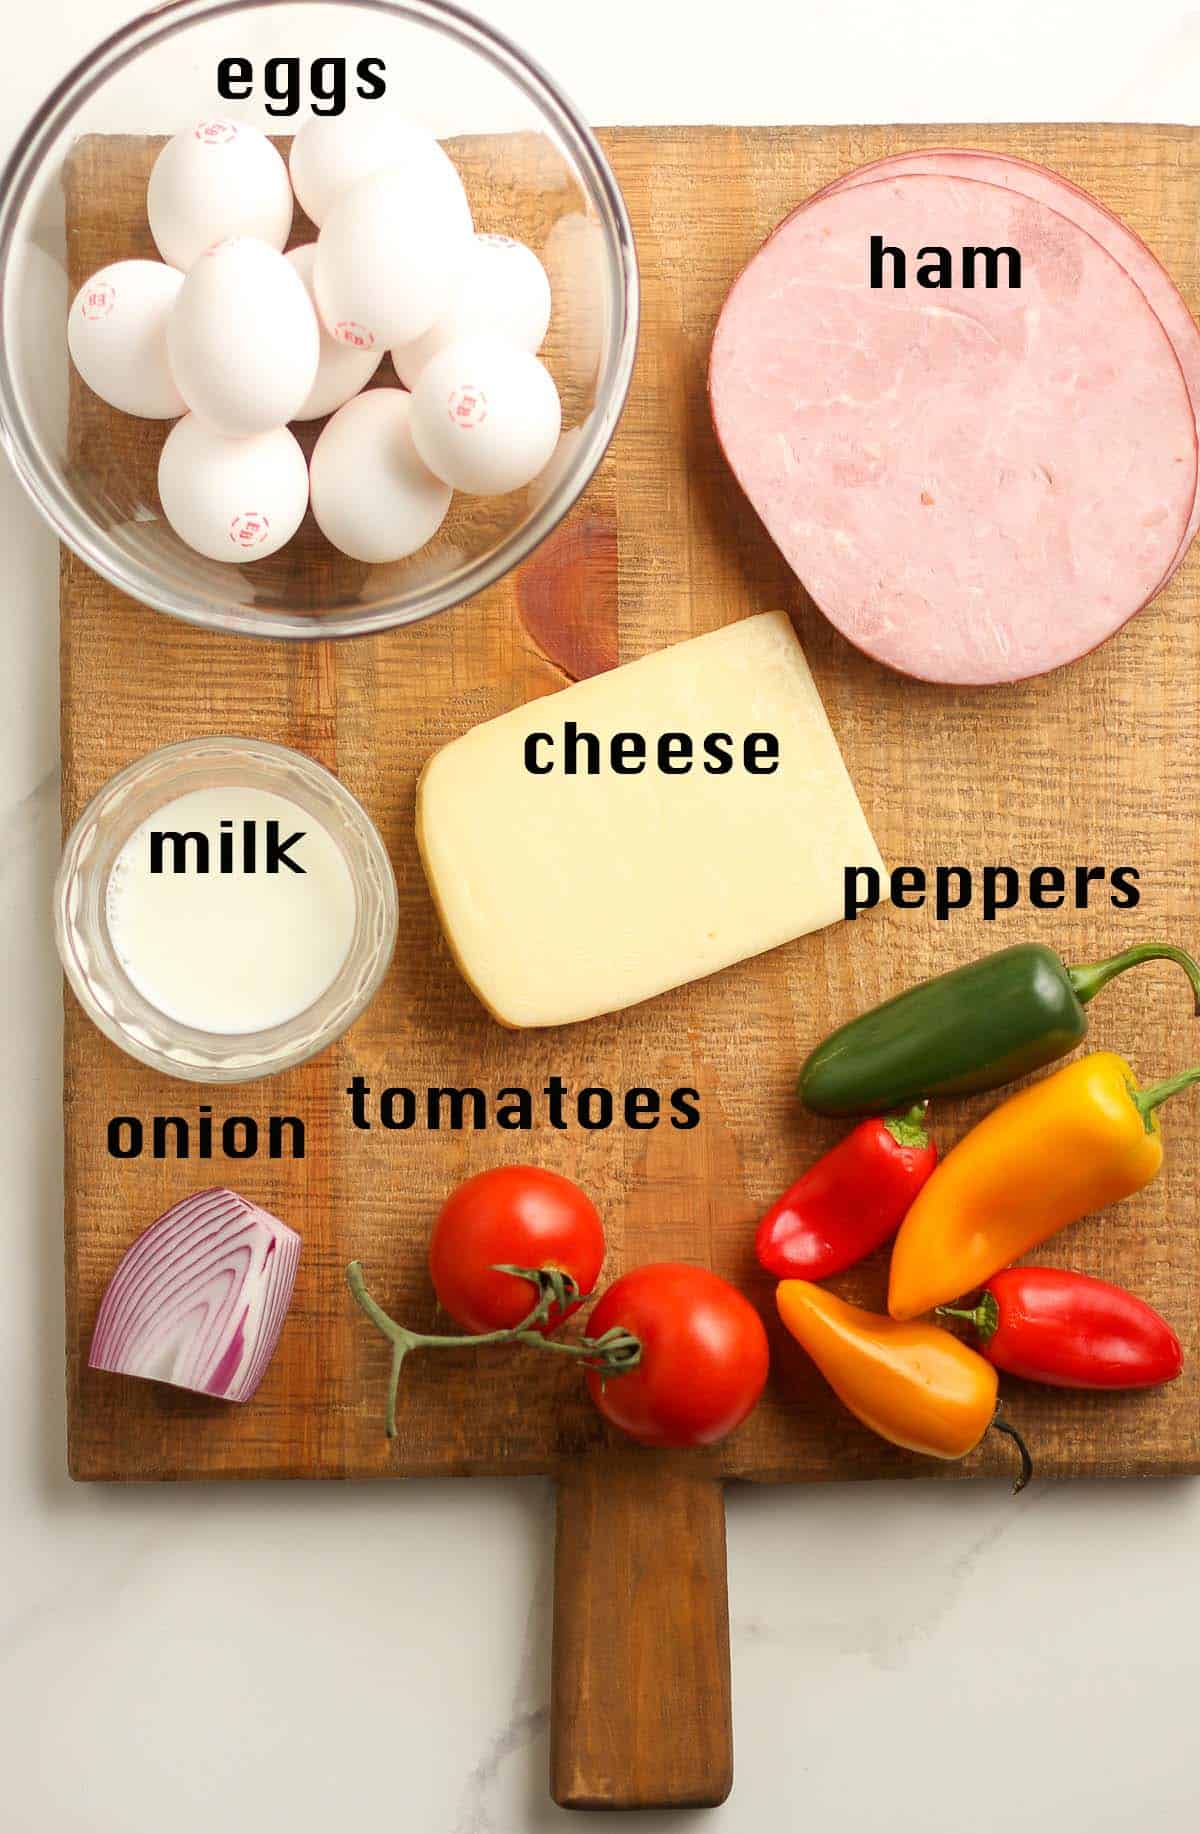 A wooden board with the labeled ingredients, including ham, cheese, eggs, and veggies.